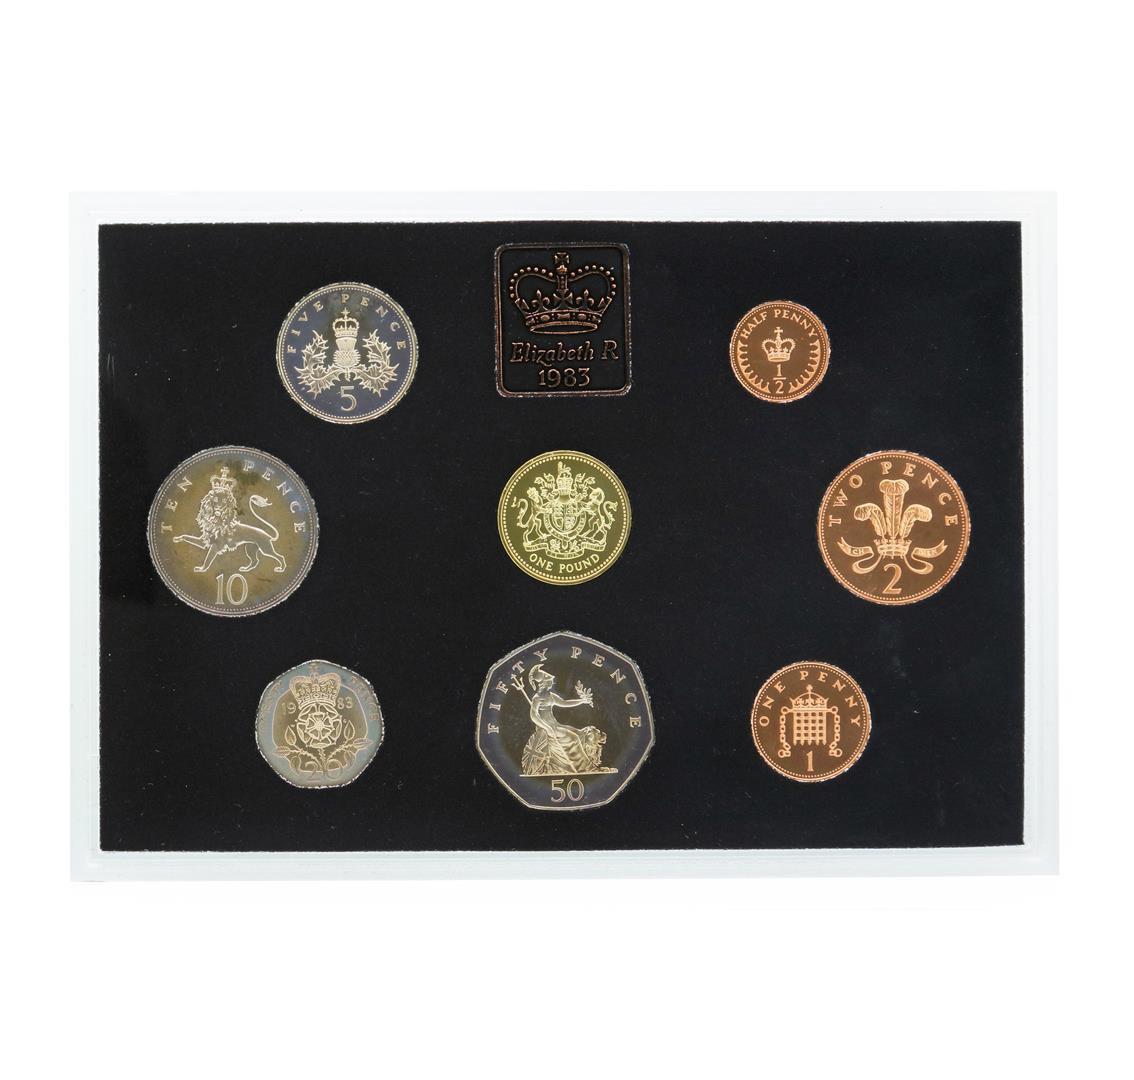 1983 Coinage of Great Britain and Northern Ireland Mint Proof Set